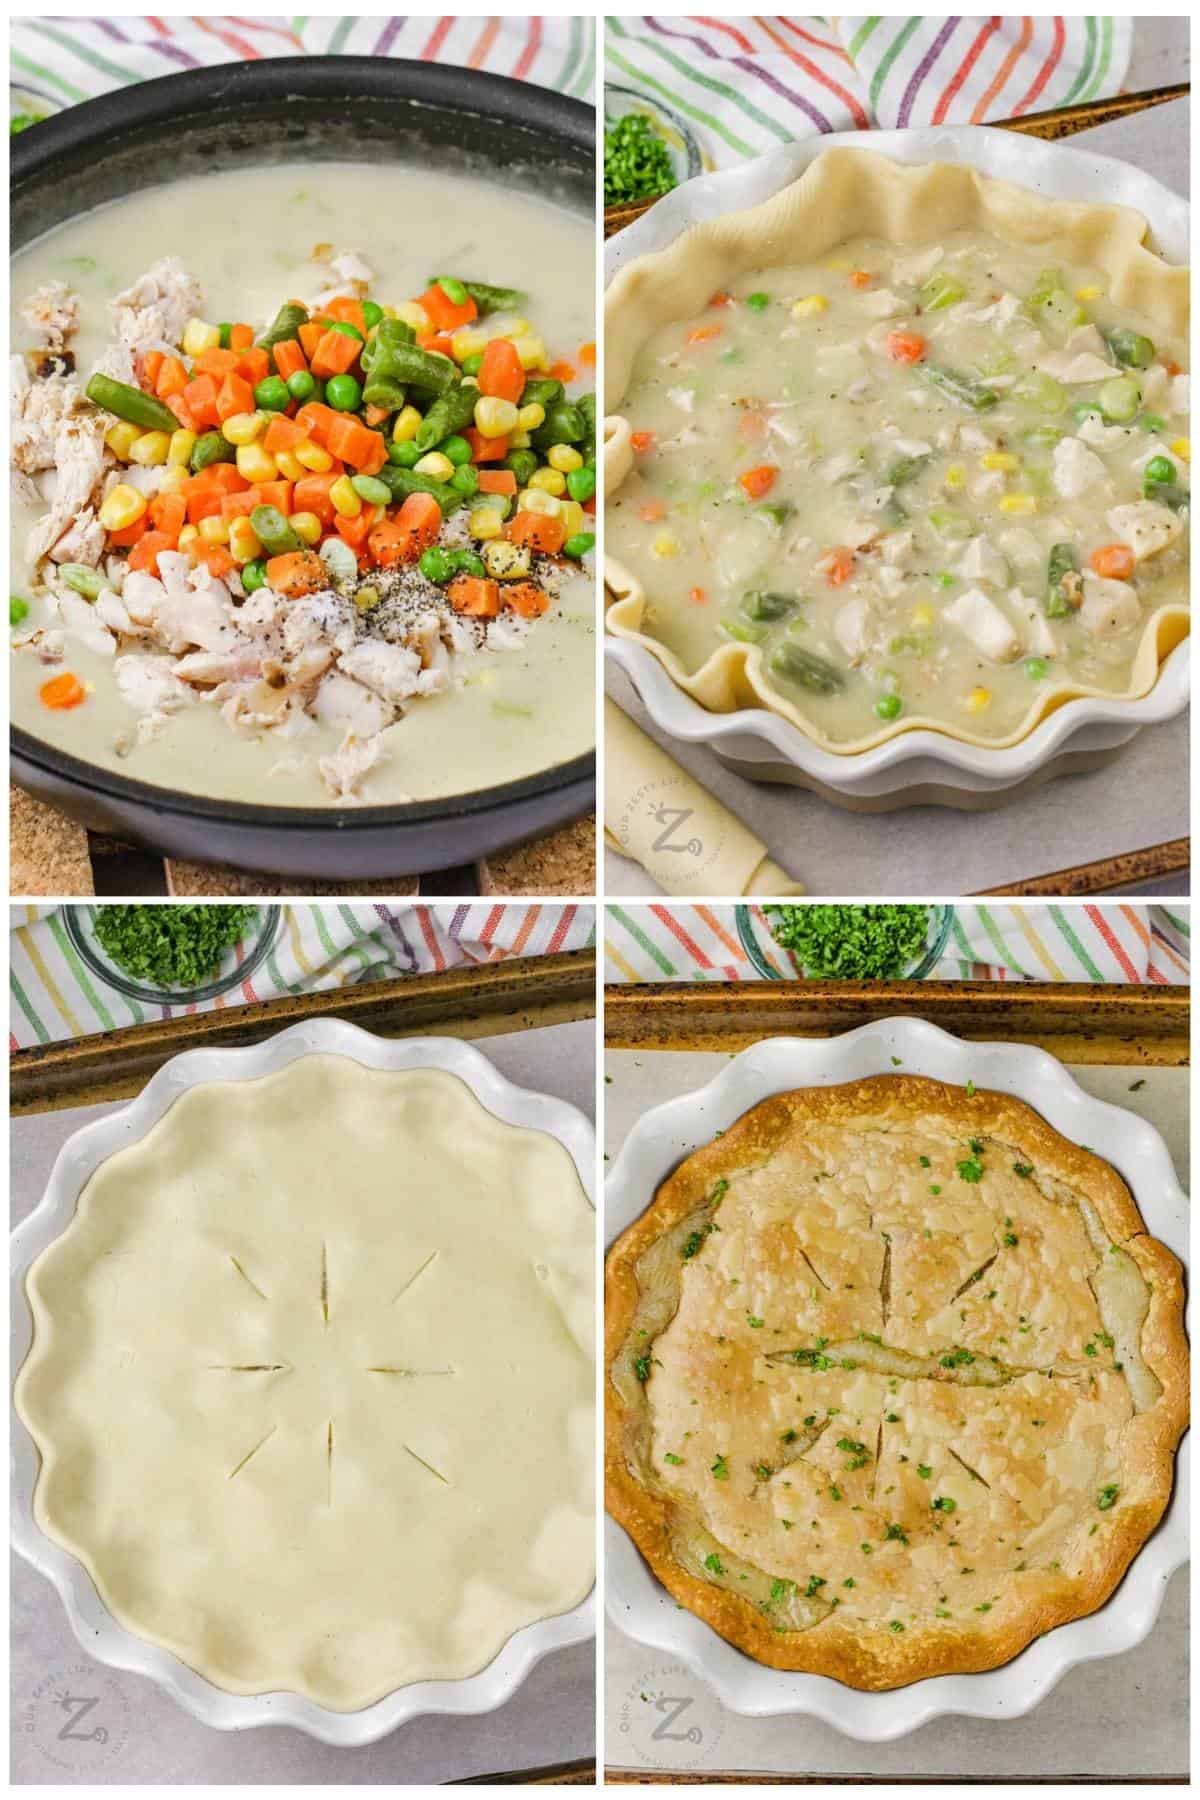 process of adding ingredients together to make Chicken Pot Pie